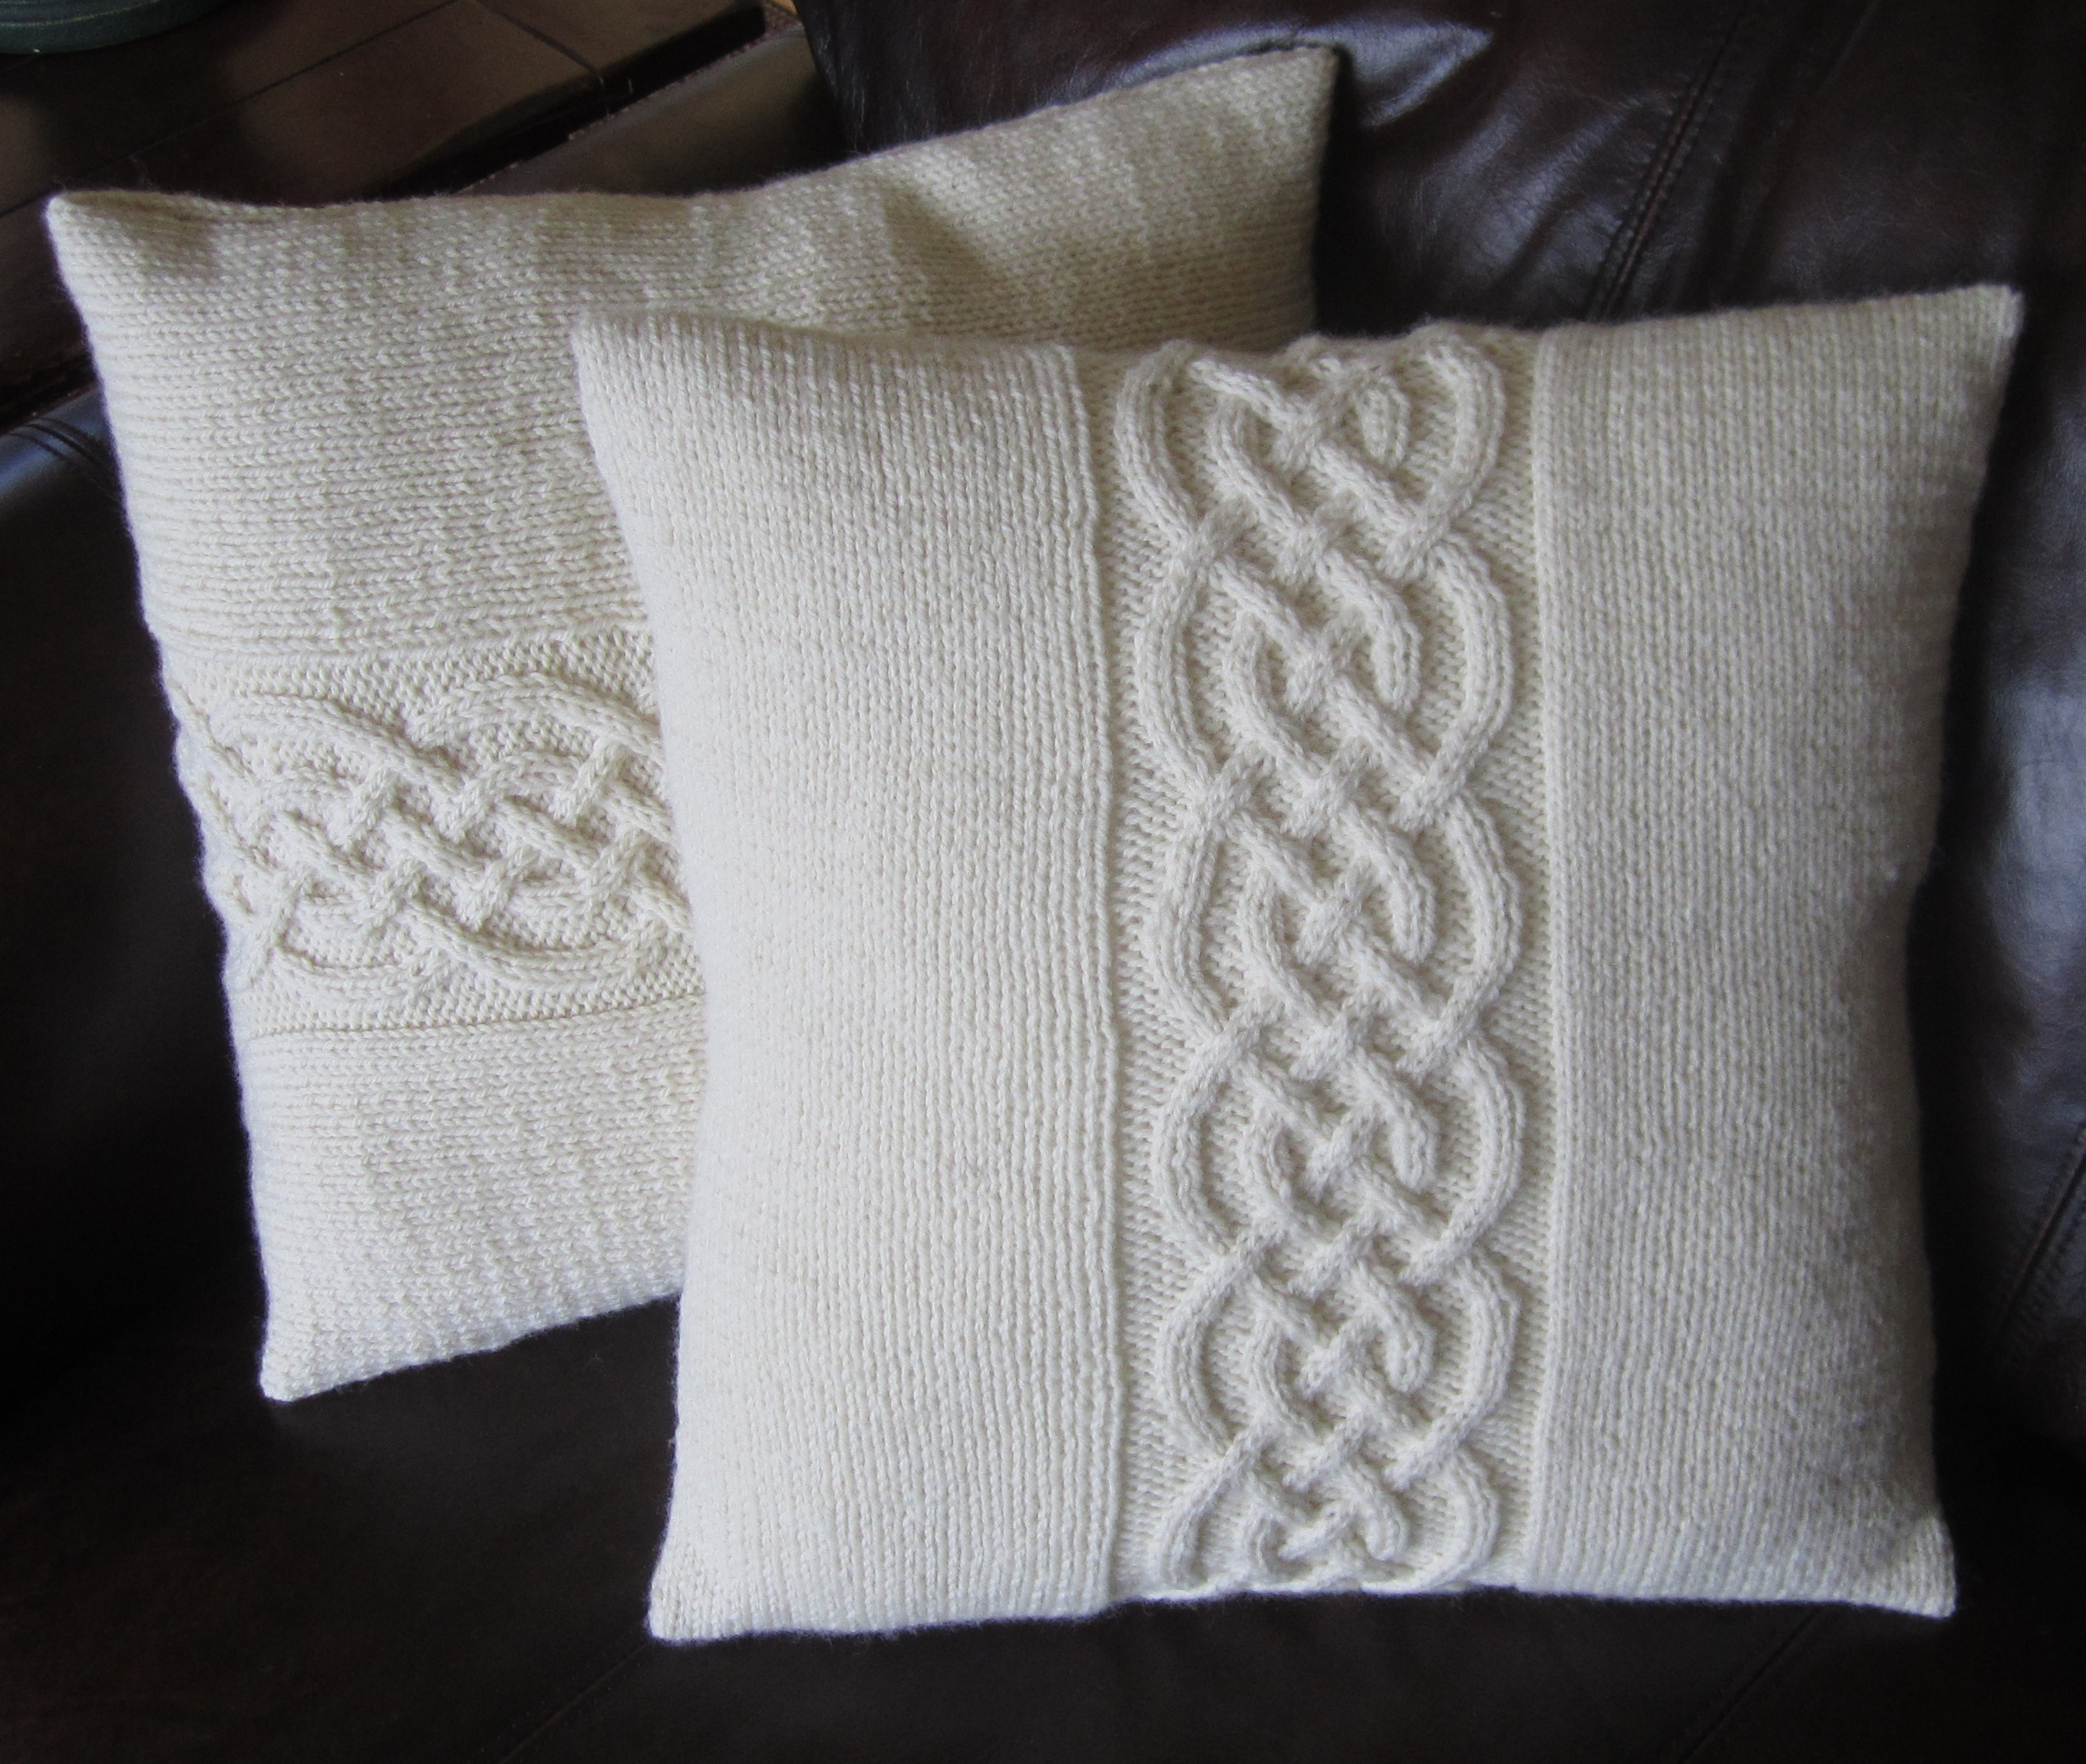 Celtic Embroidery Patterns Celtic Knot Pillow Cover Knitting Pattern 1640cm And 1845cm